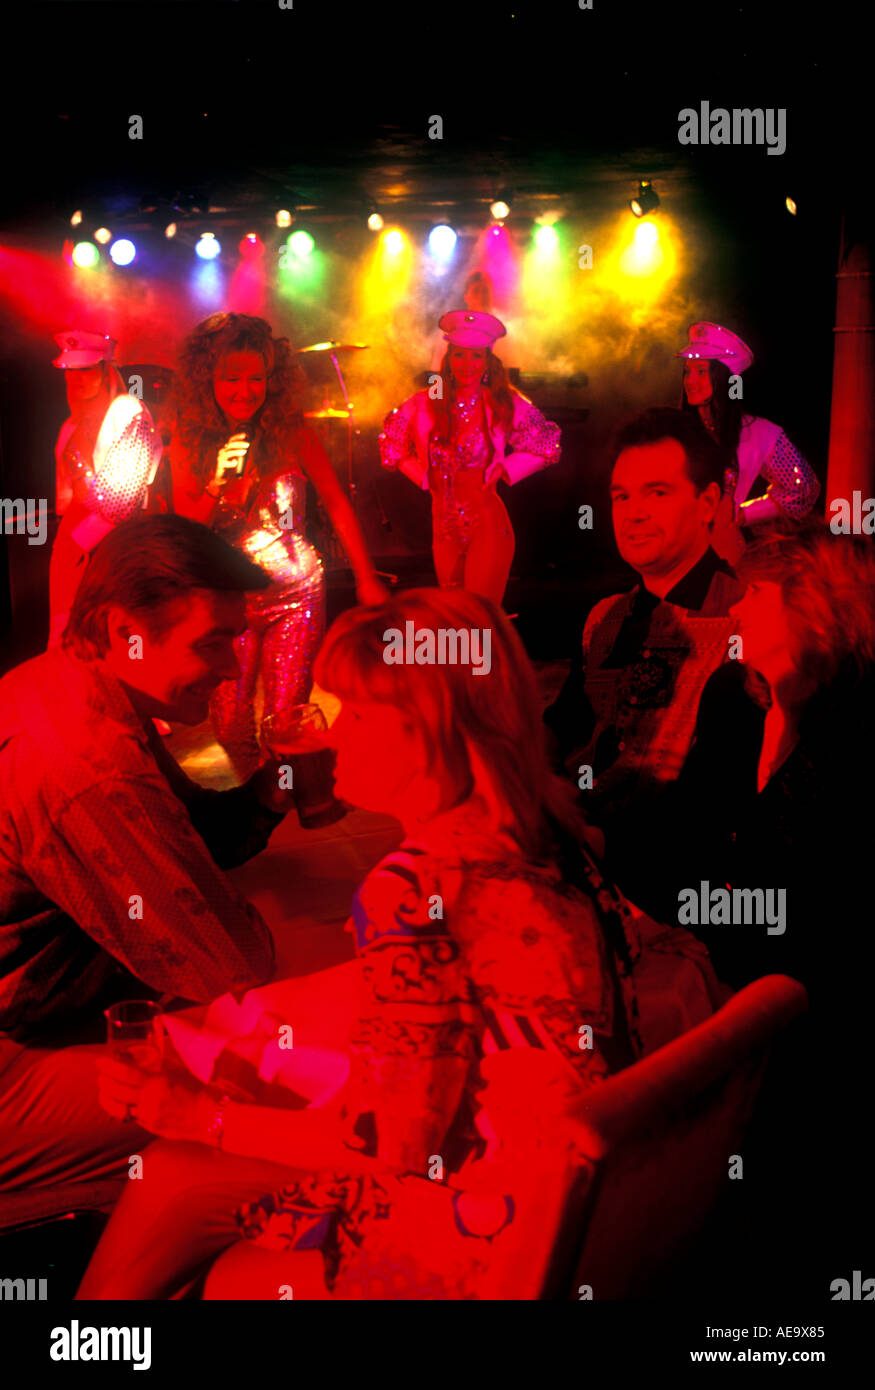 two 2 couples sitting down in disco night club with very red lighting on faces enjoying dancers dancing Stock Photo